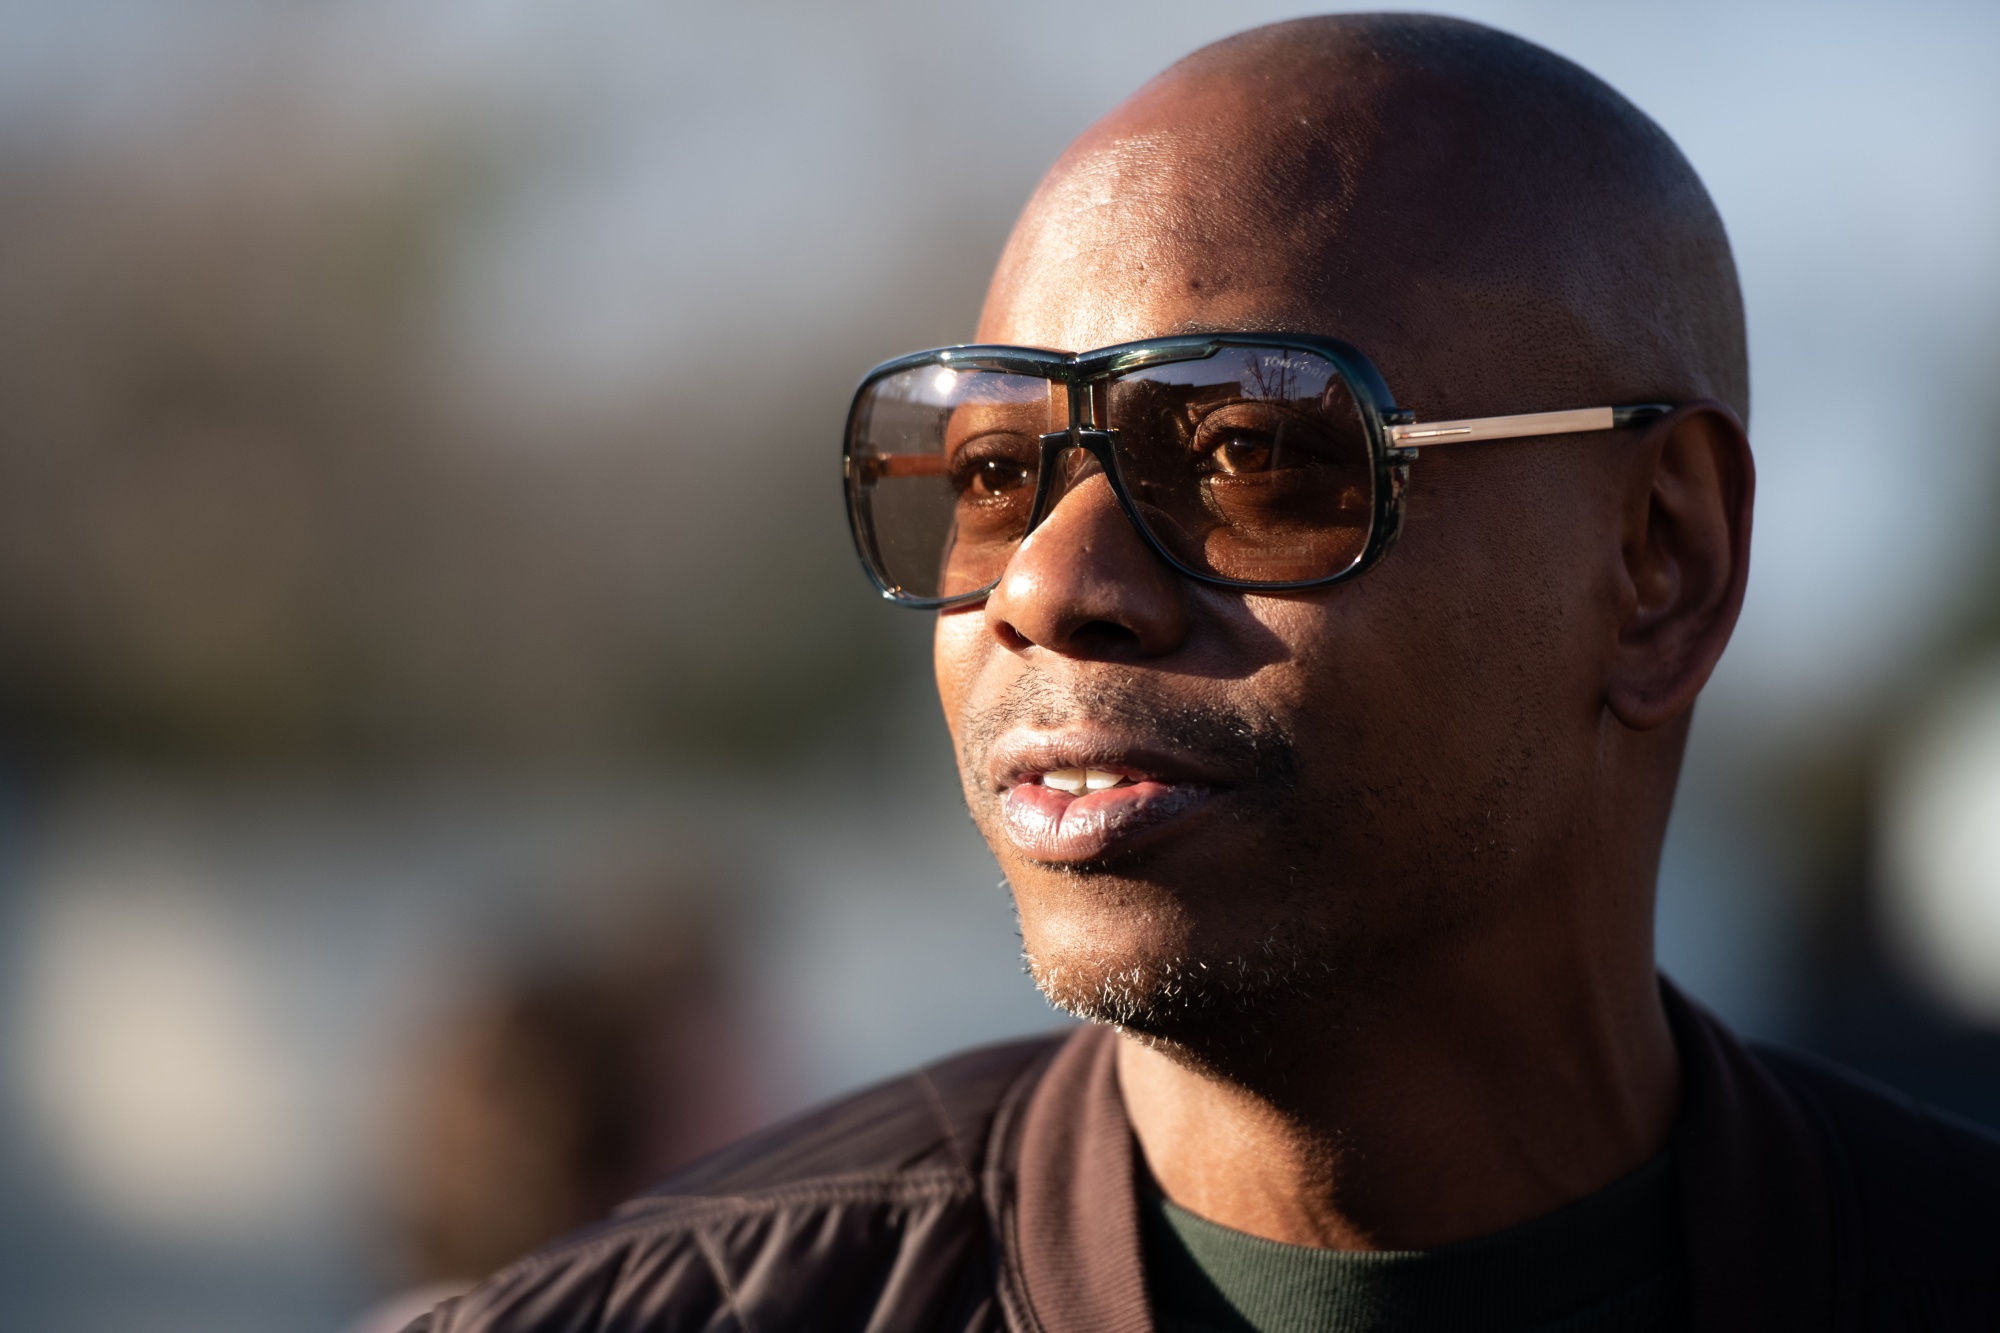 Netflix Defends Dave Chappelle Comedy Special, Suspends Trans Employee